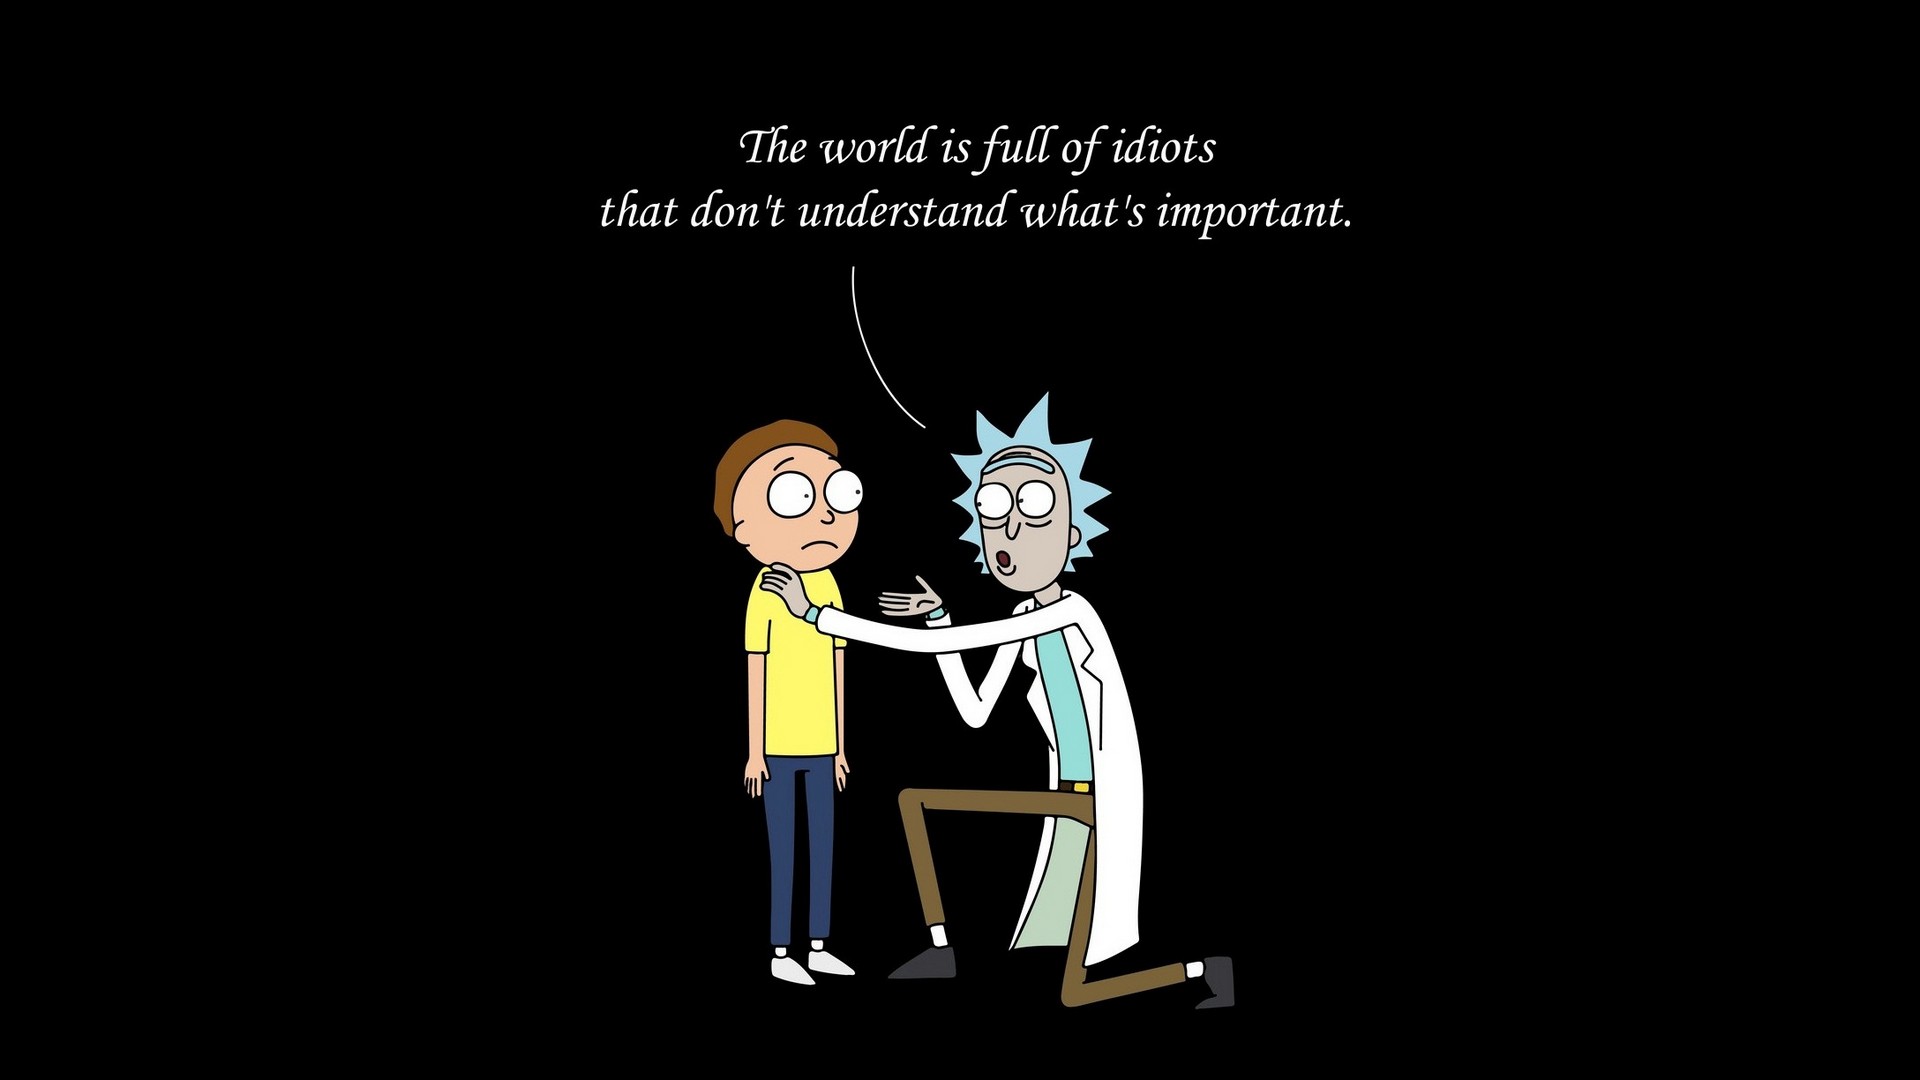 Cartoon Network Rick and Morty Desktop Wallpaper with resolution 1920X1080 pixel. You can use this wallpaper as background for your desktop Computer Screensavers, Android or iPhone smartphones